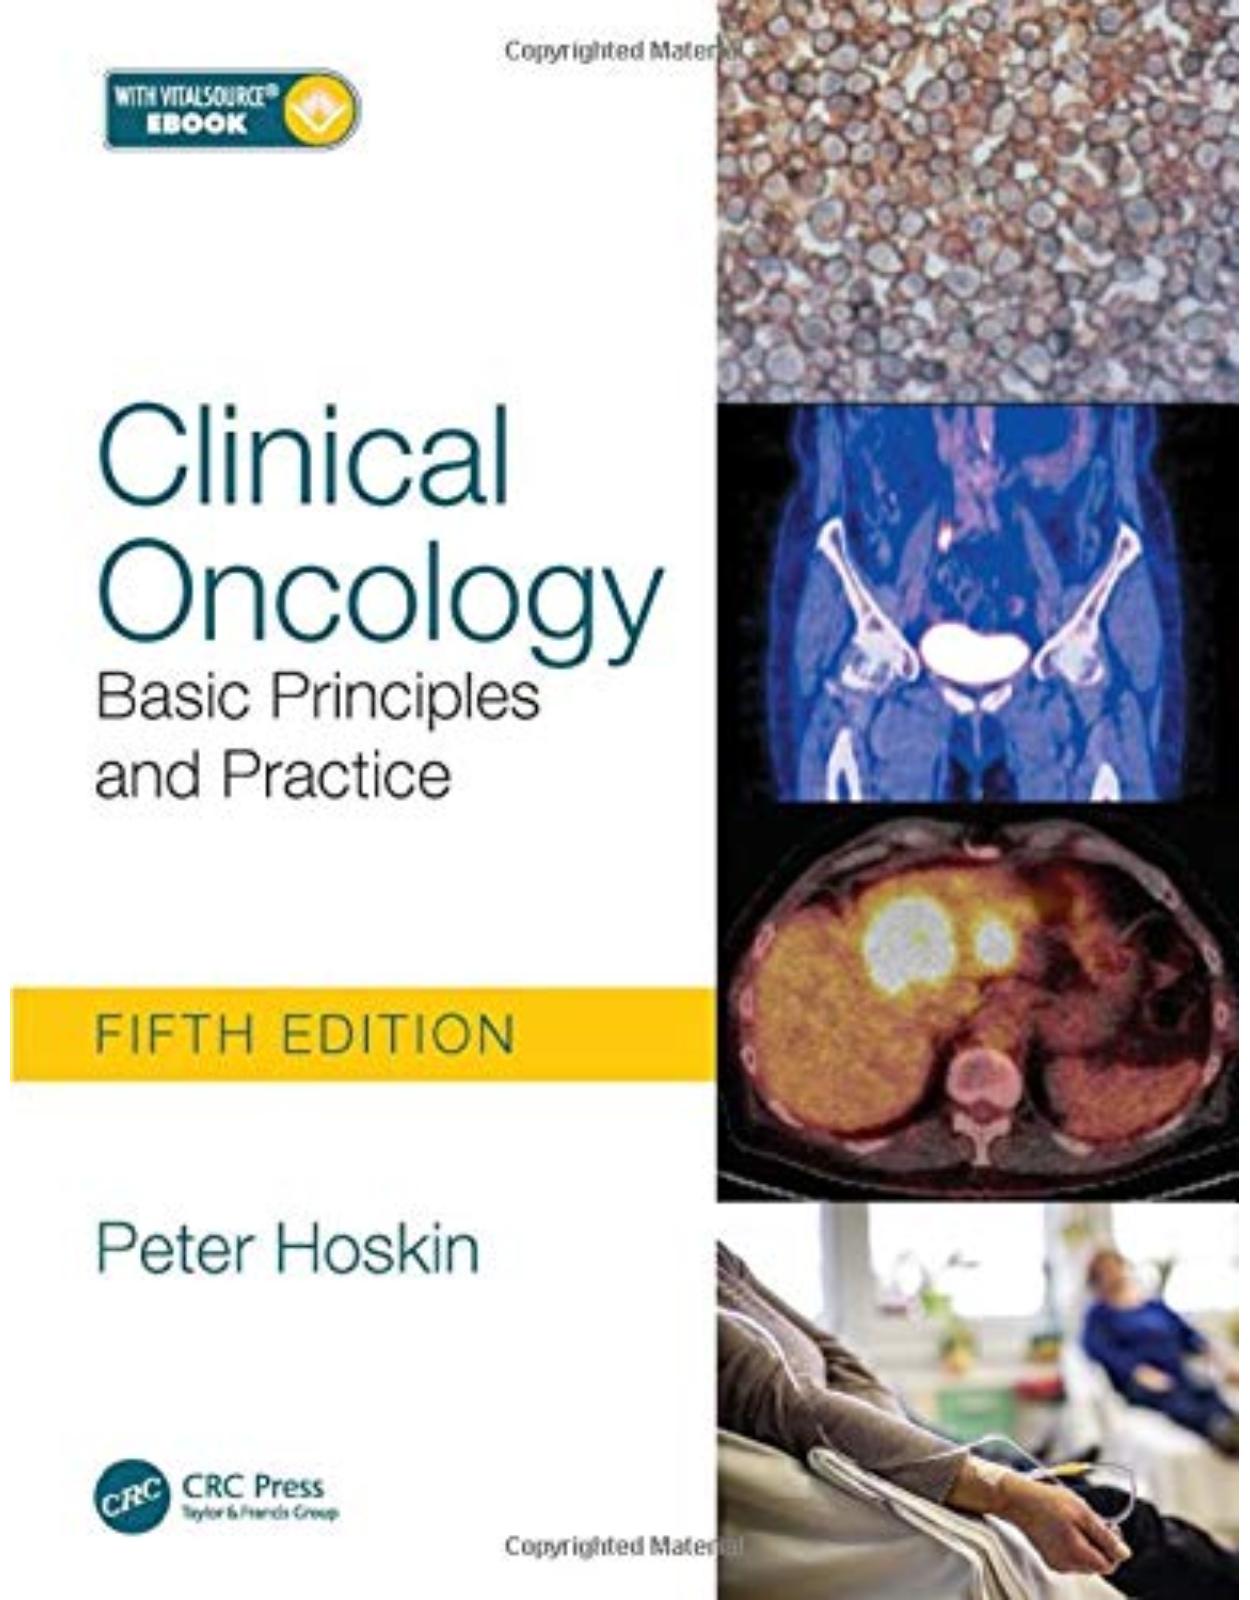 Clinical Oncology, Fifth Edition: Basic Principles and Practice